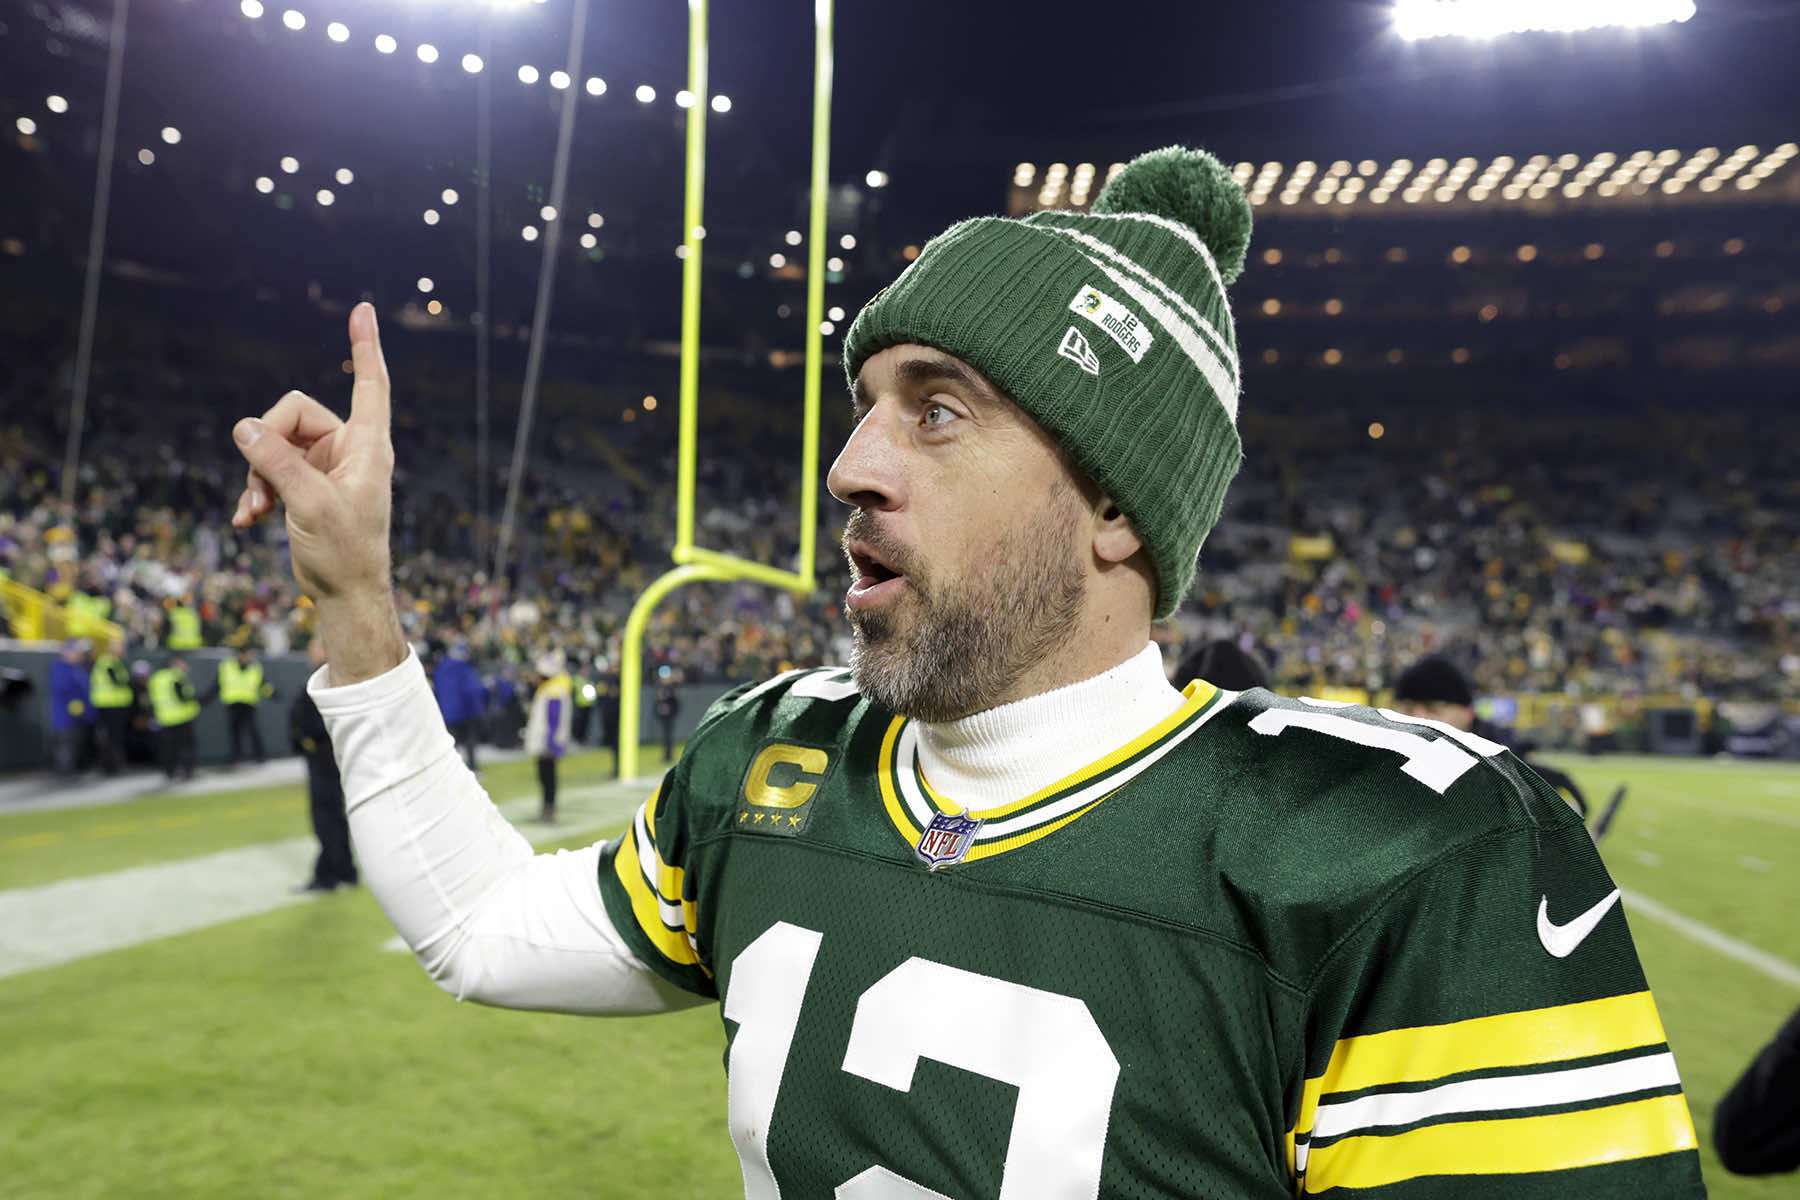 Packers' playoff chances not dead yet